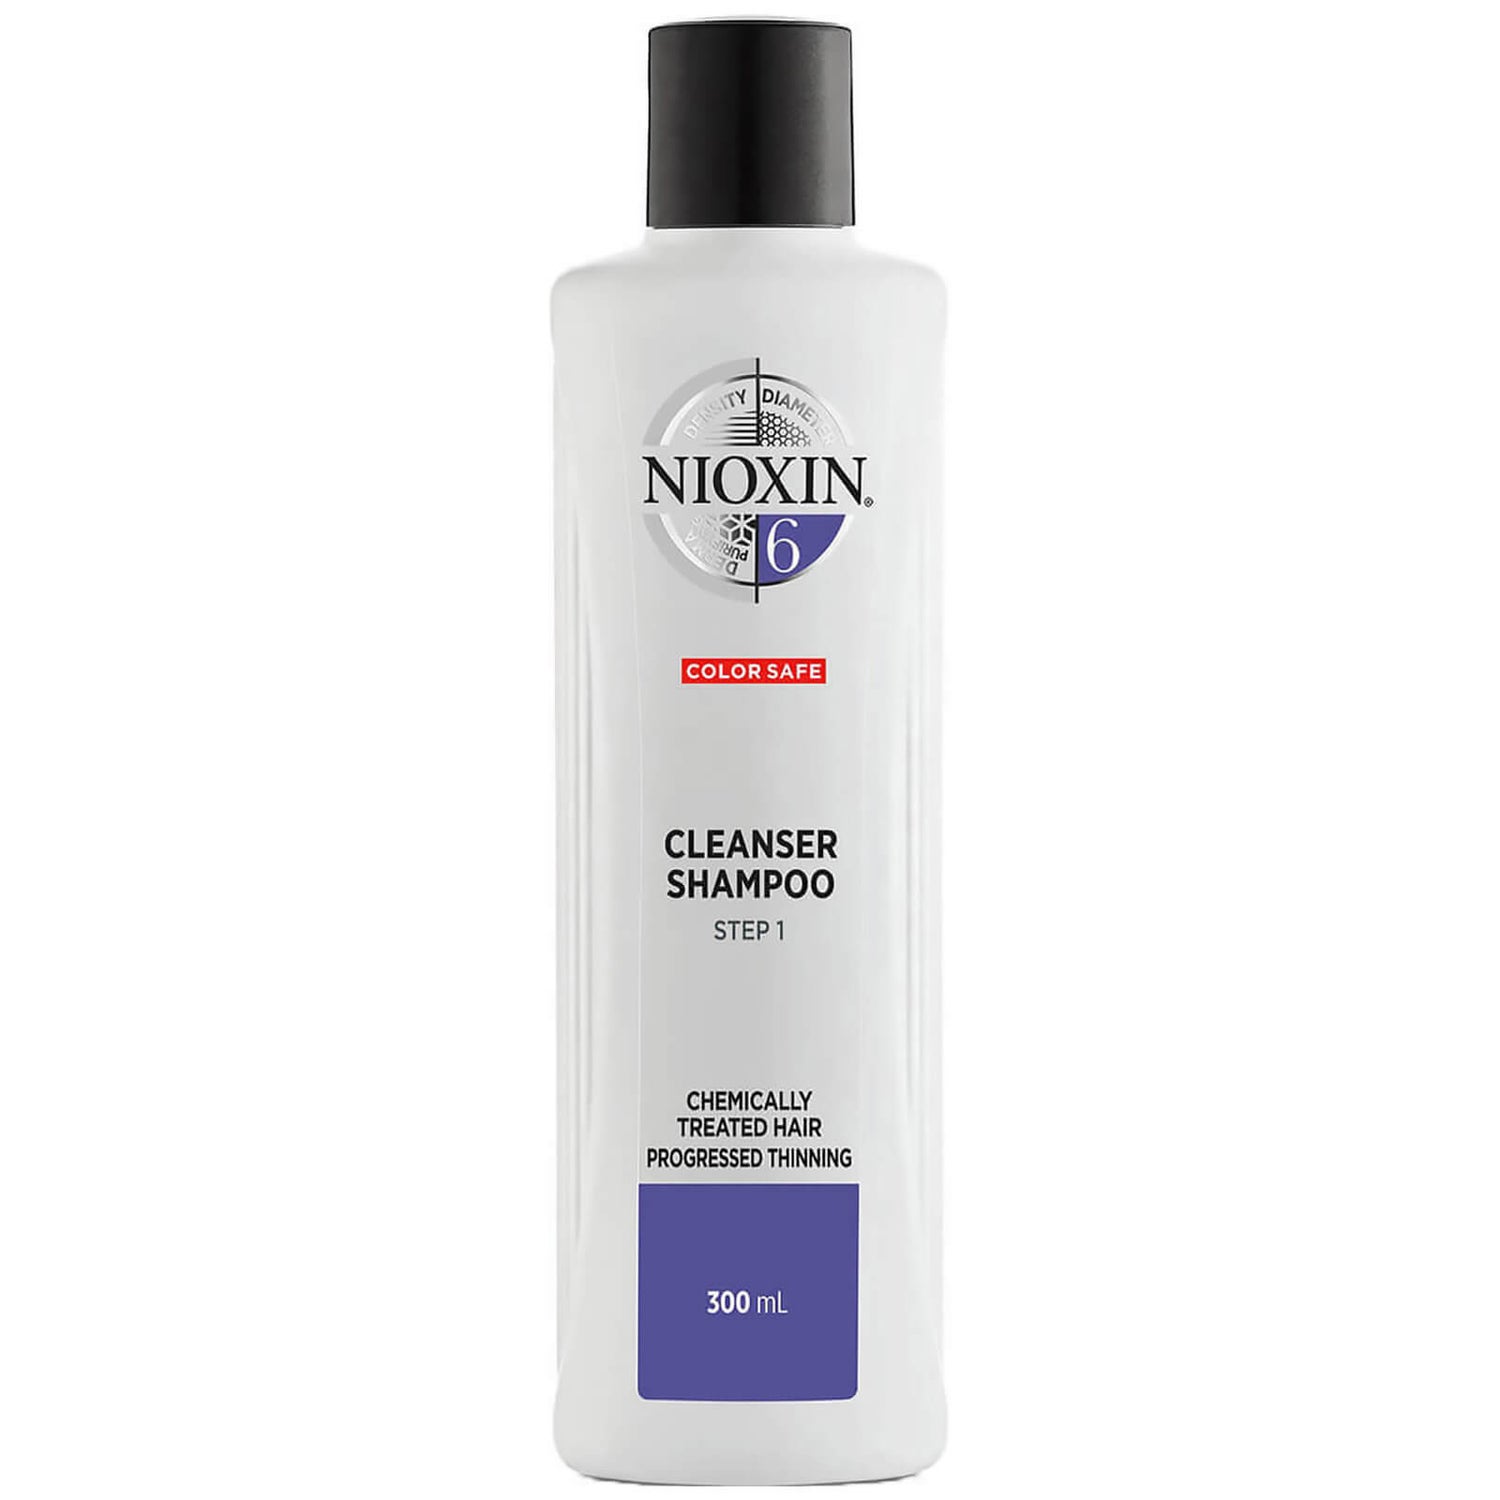 NIOXIN 3-Part System 6 Cleanser Shampoo for Chemically Treated Hair with Progressed Thinning -shampoo, 300 ml